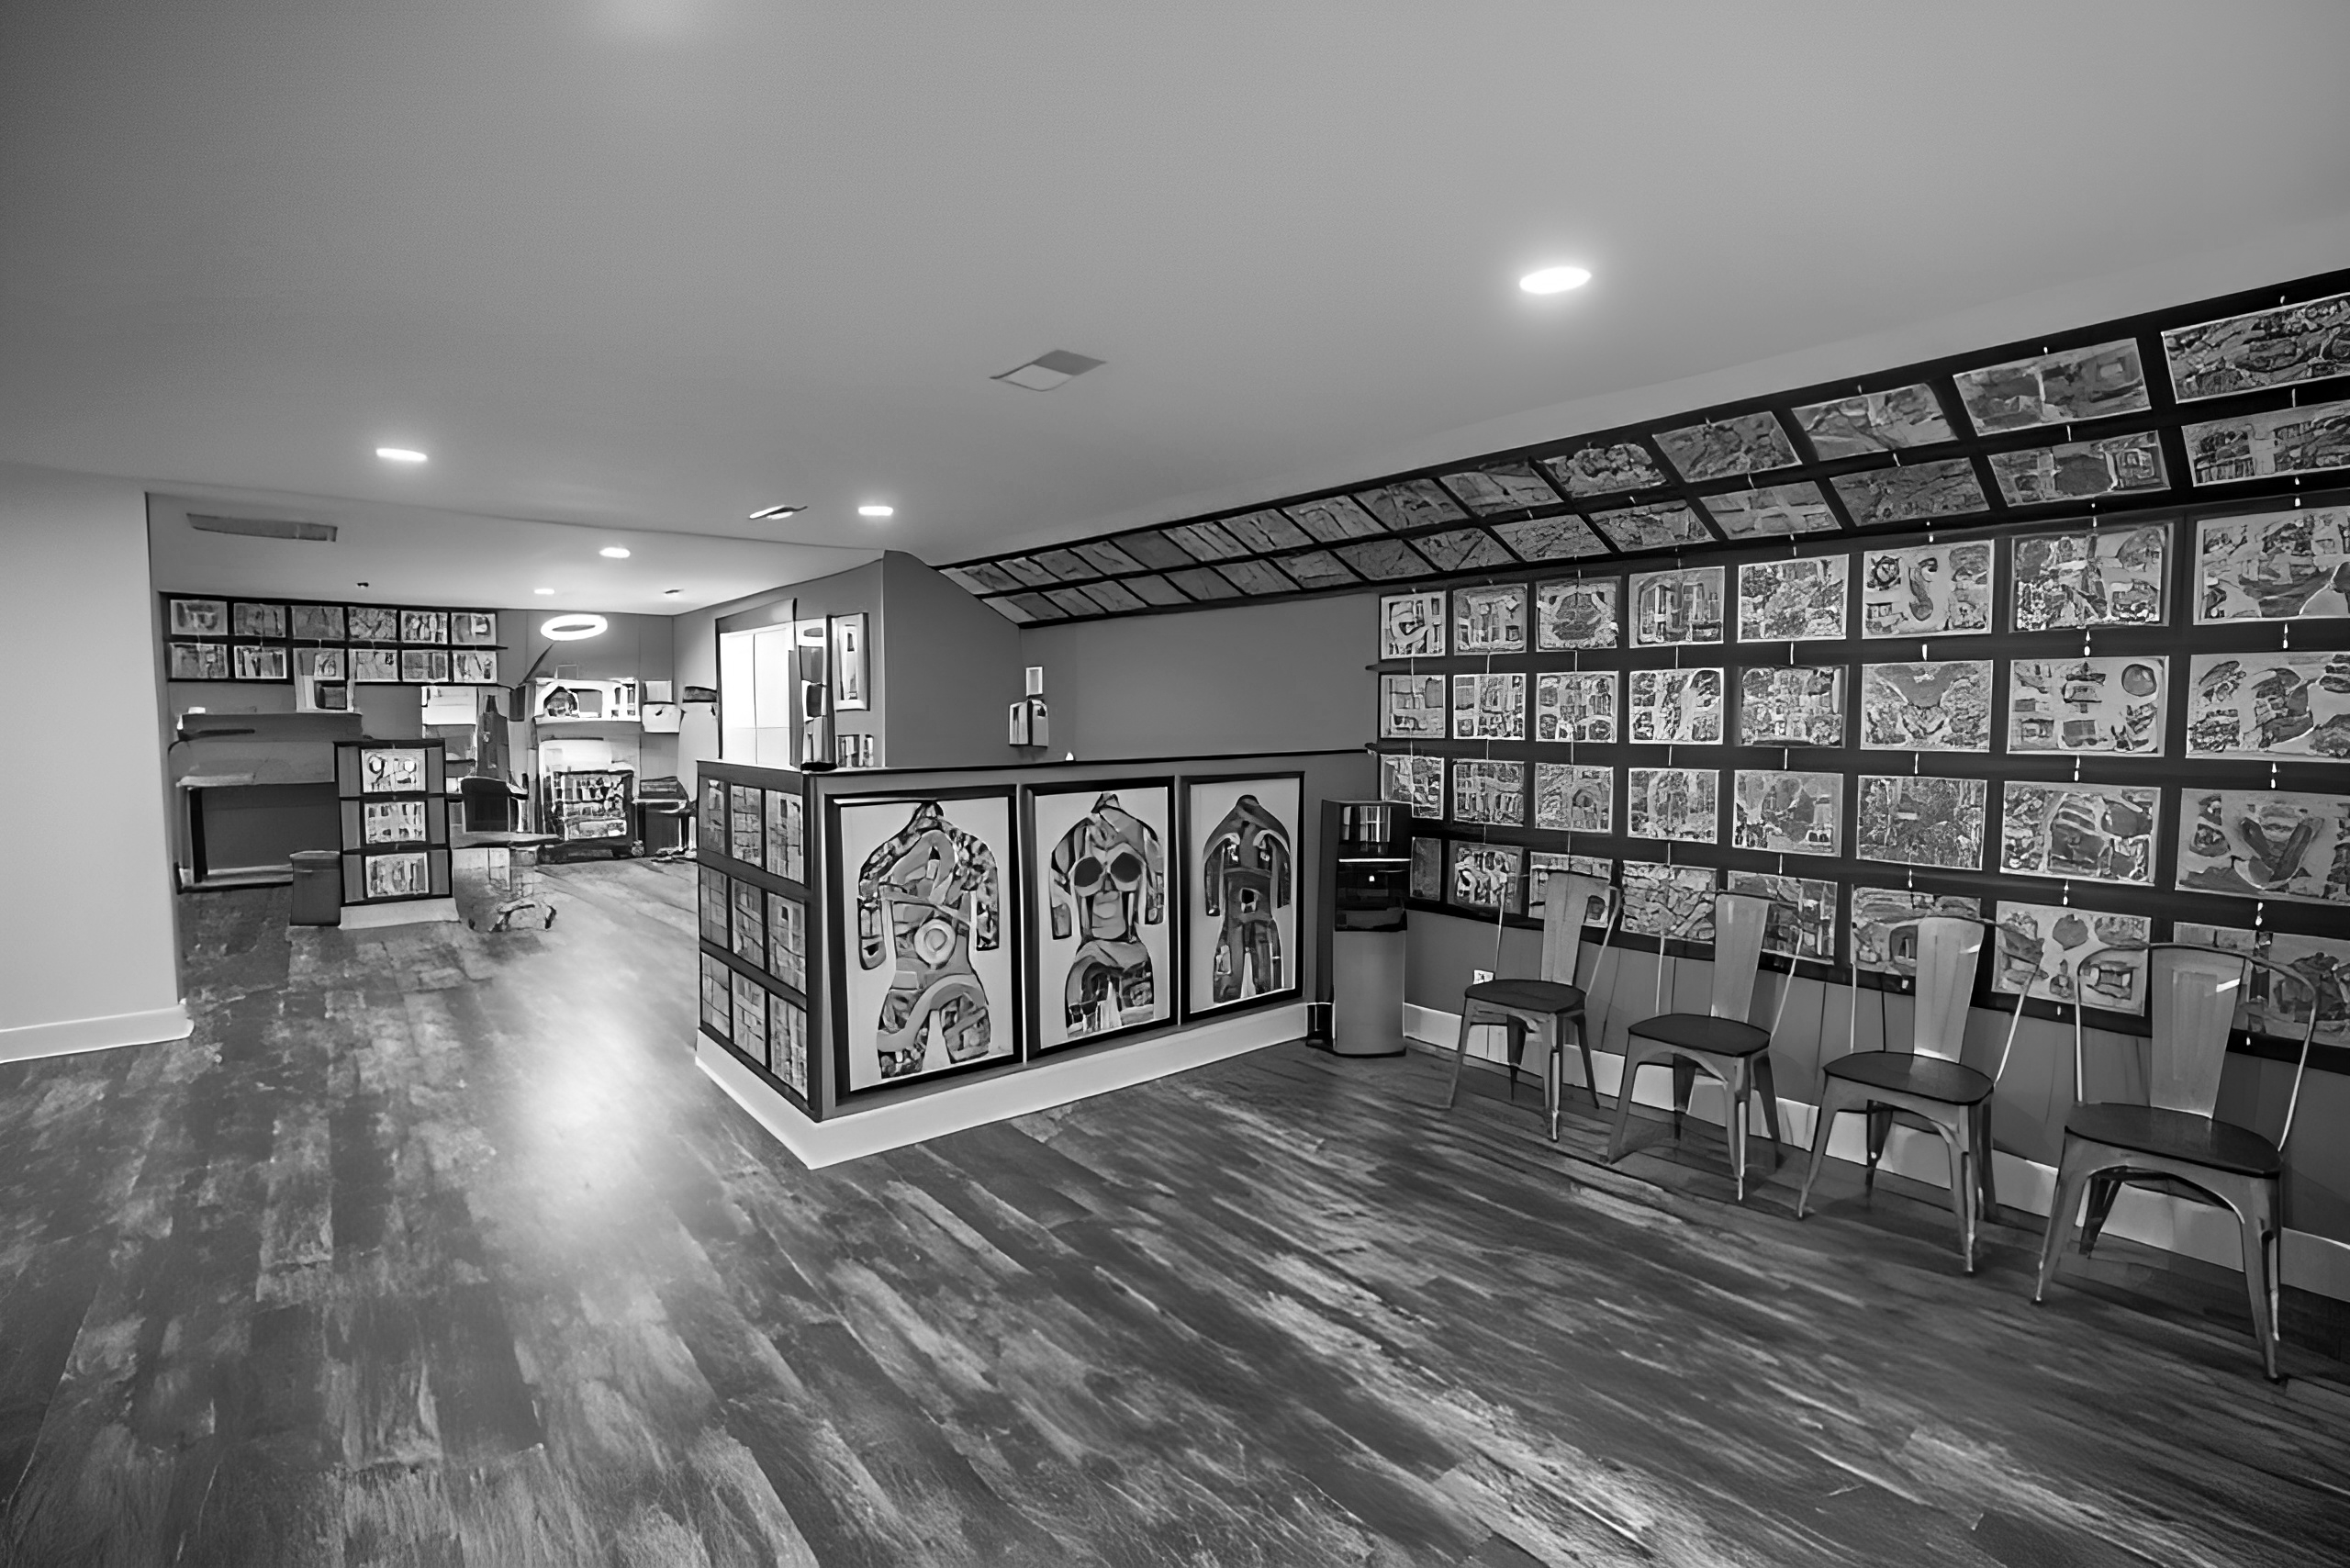 7 Private Tattoo Studio Ideas to Get More Customers